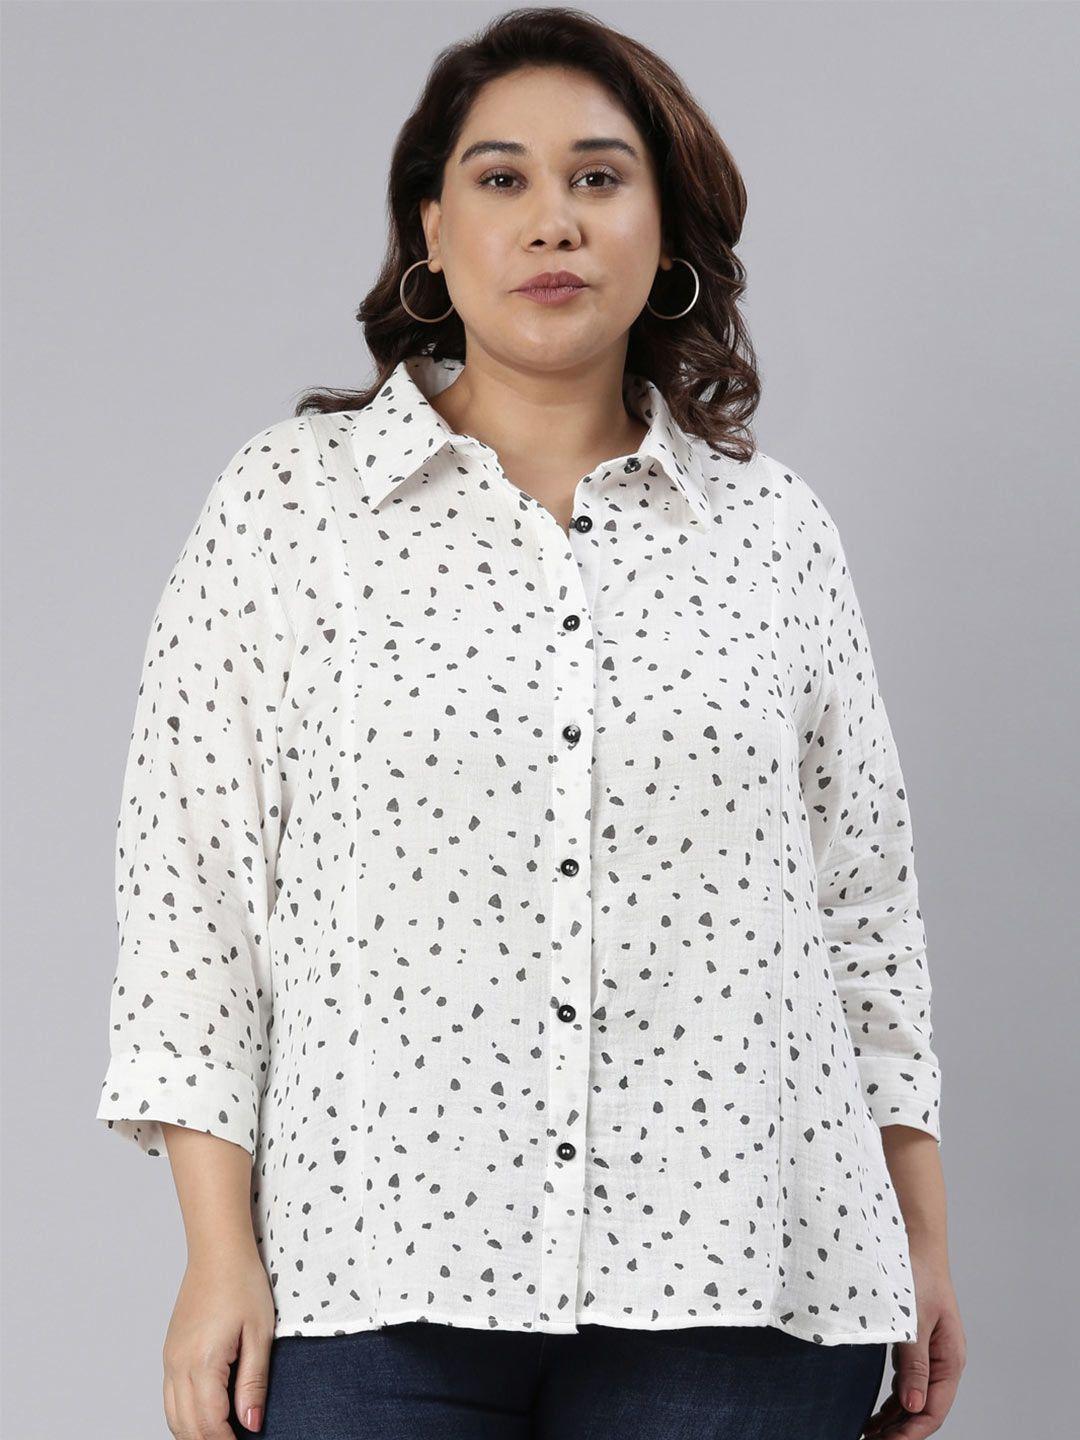 The Pink Moon Women Plus Size Printed Casual Cotton Shirt